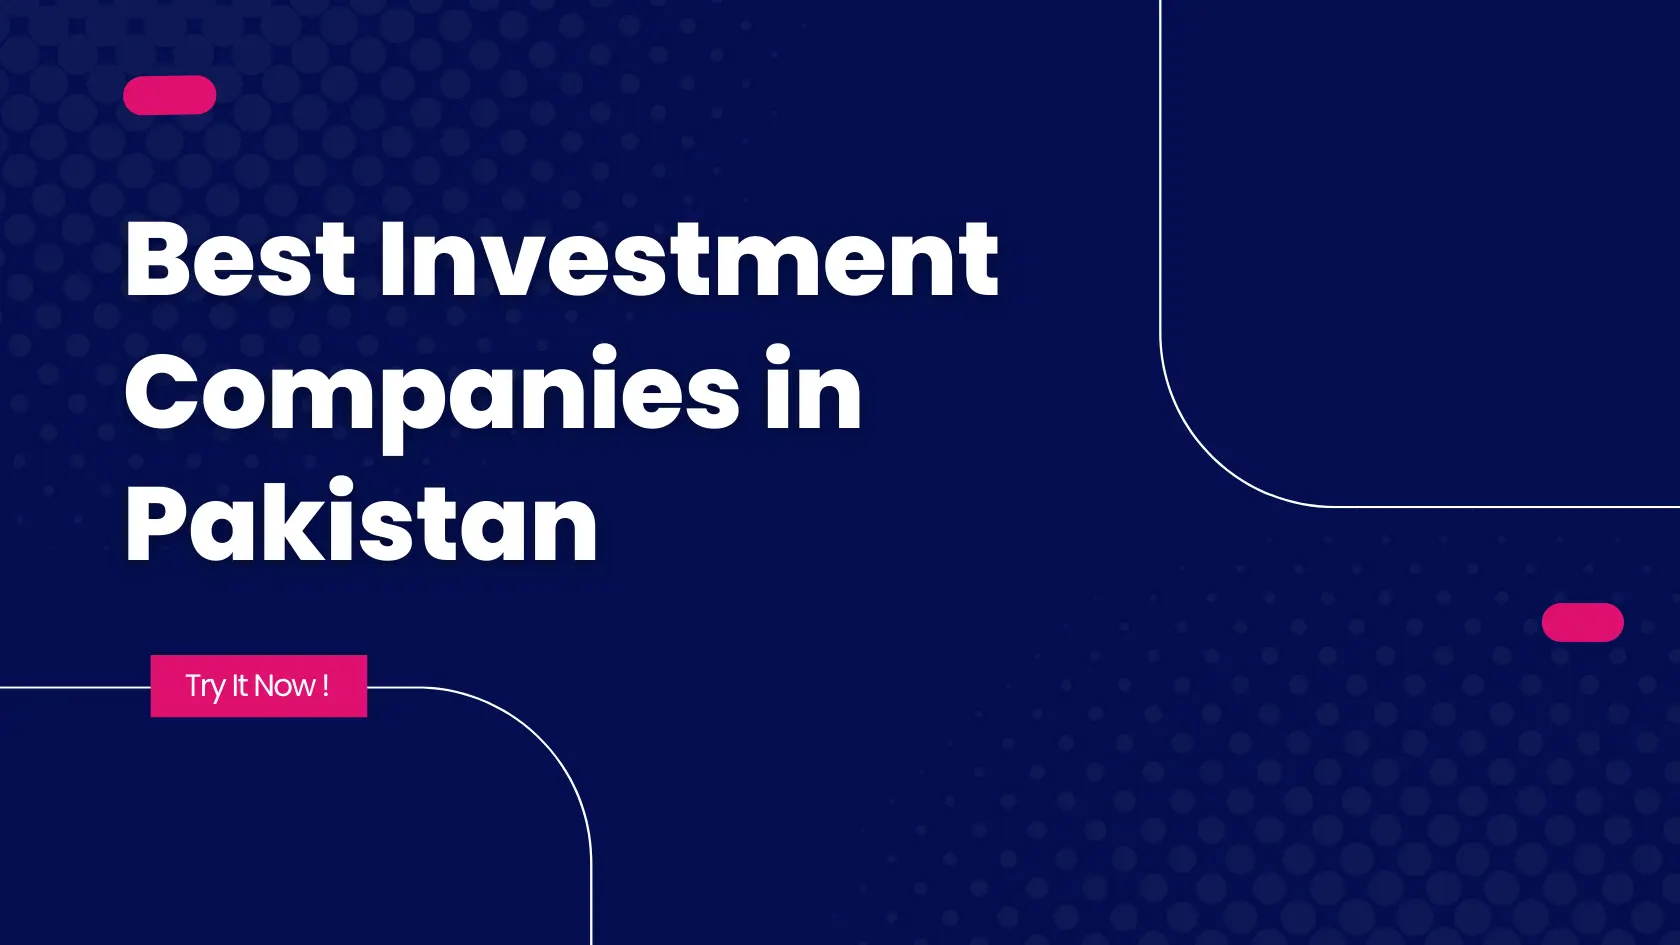 Best Investment Companies in Pakistan